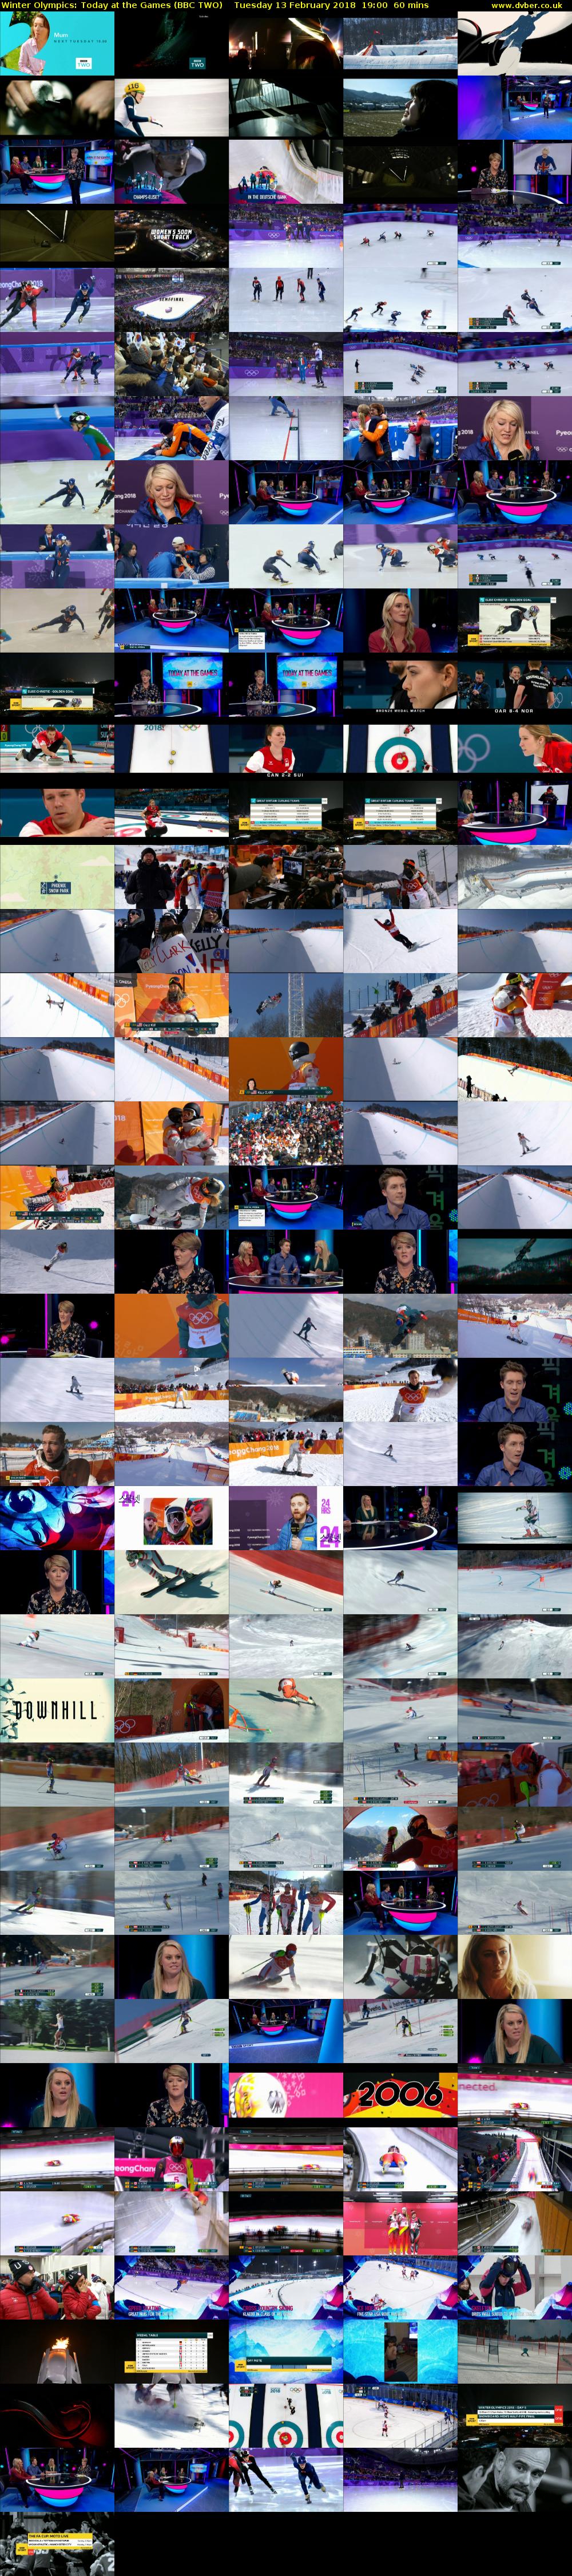 Winter Olympics: Today at the Games (BBC TWO) Tuesday 13 February 2018 19:00 - 20:00